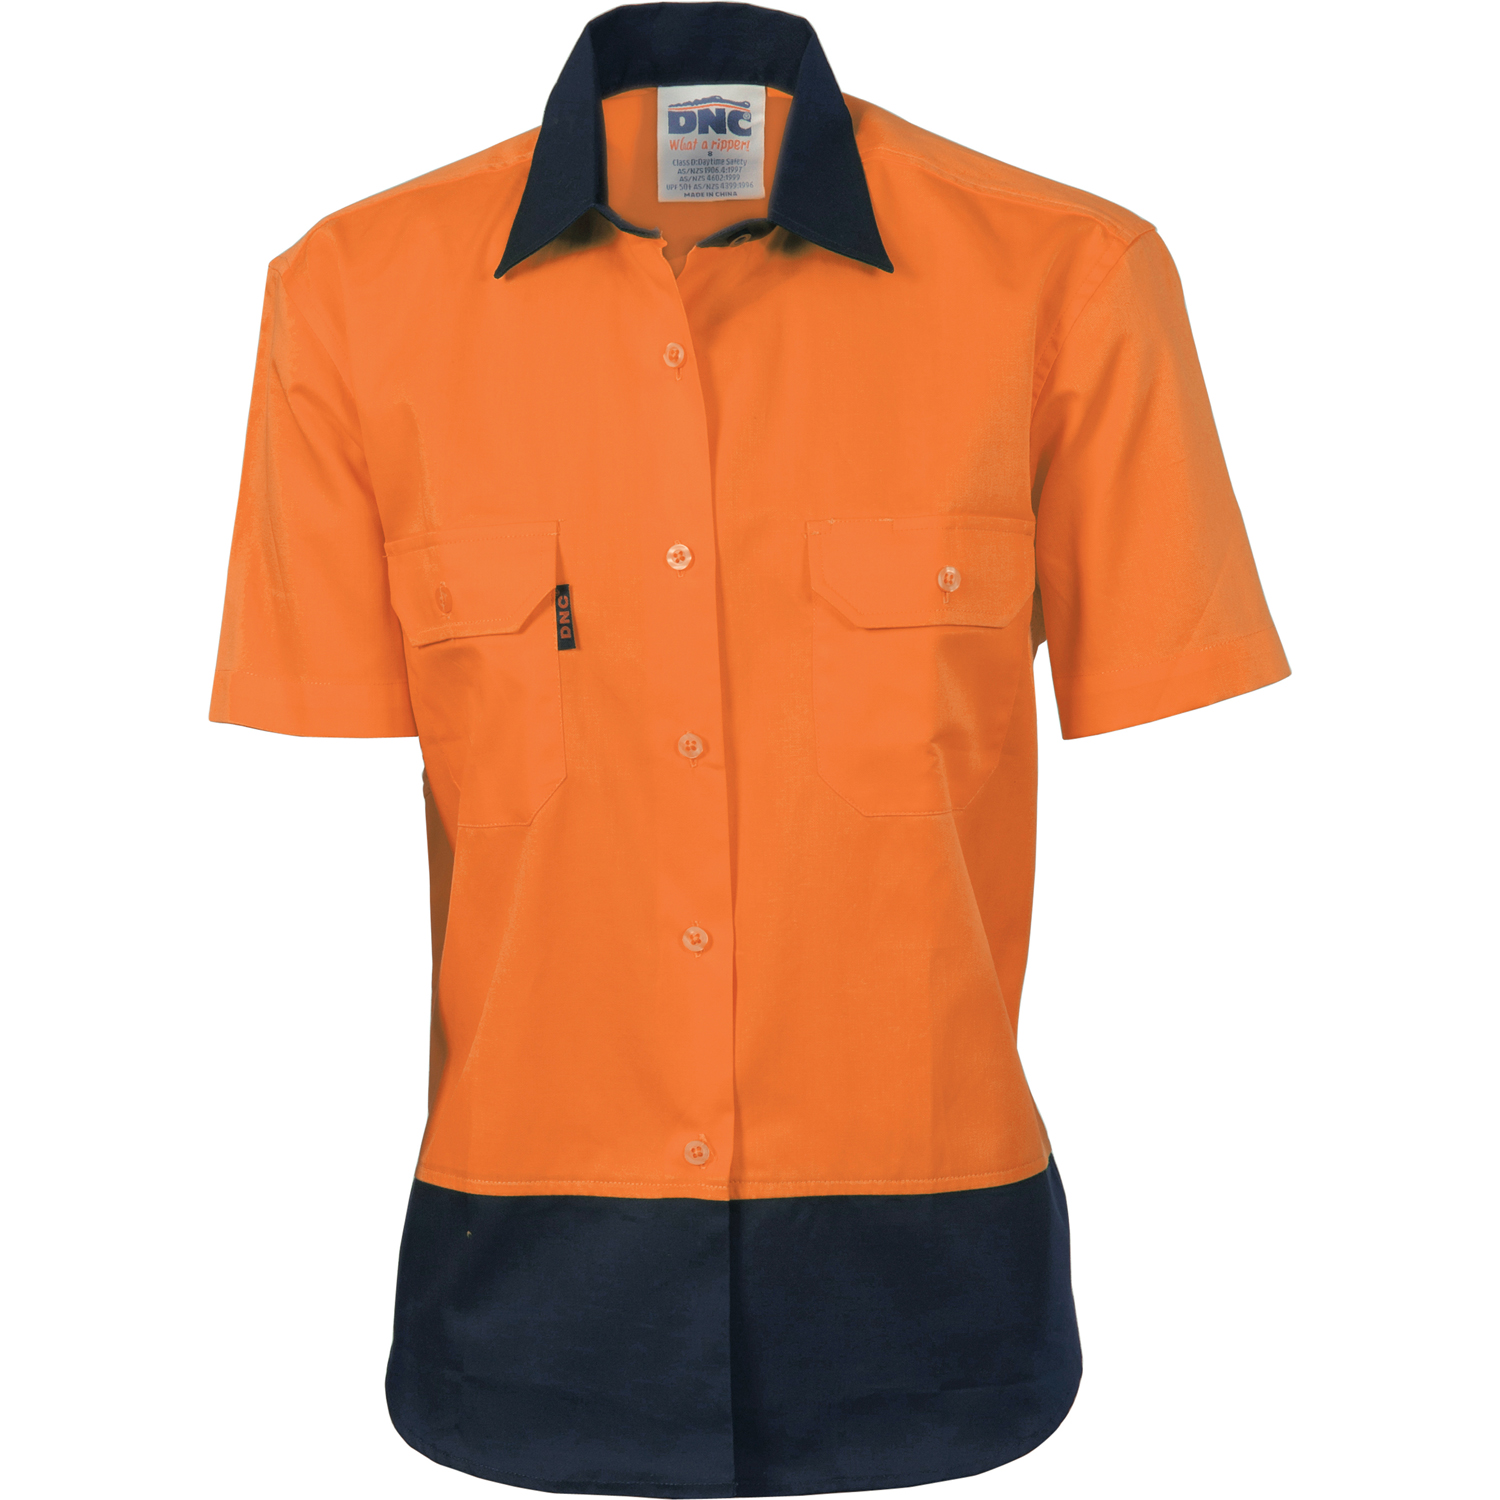 DNC 3931-190gsm Ladies HiVis Two Tone Cotton Drill Shirt, S/S